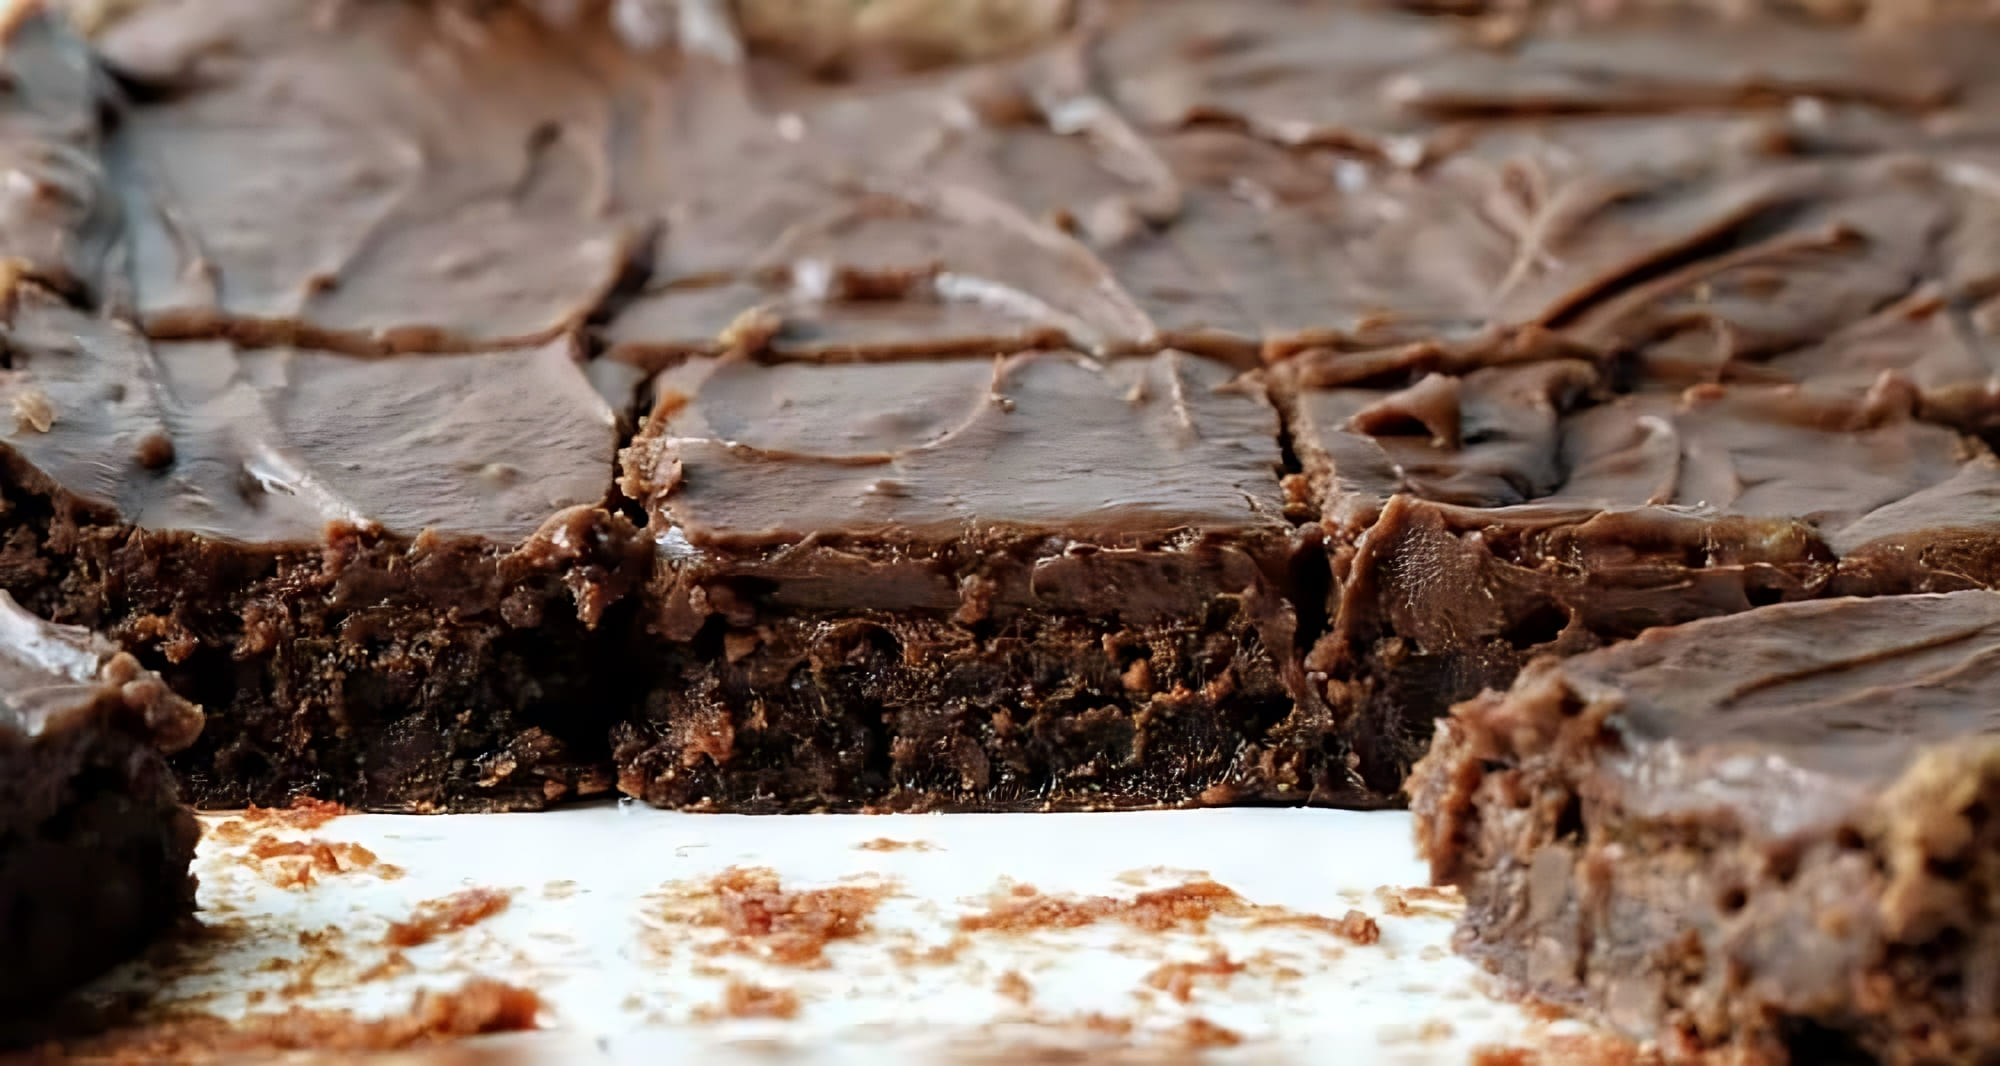 Decadent Frosting for Brownies: A Must-Try Recipe!